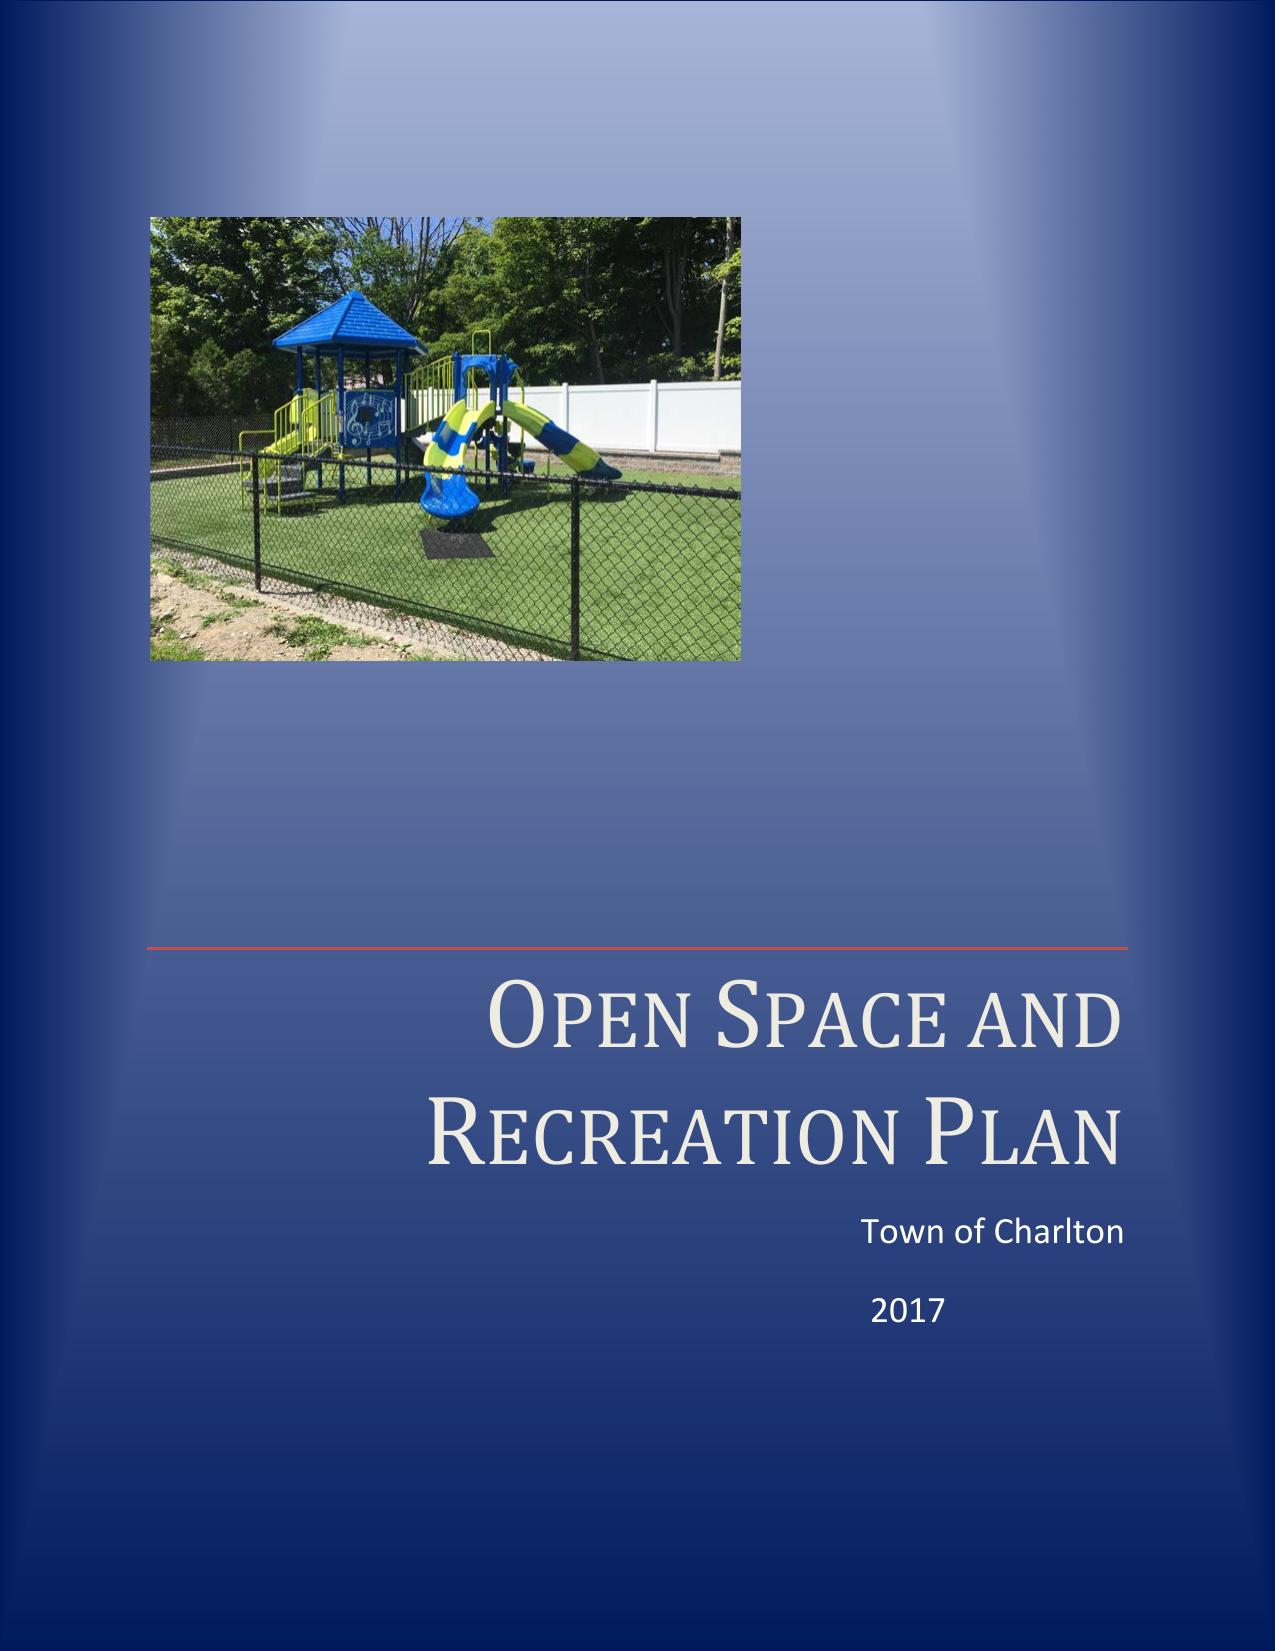 Open space and recreation plan 2017